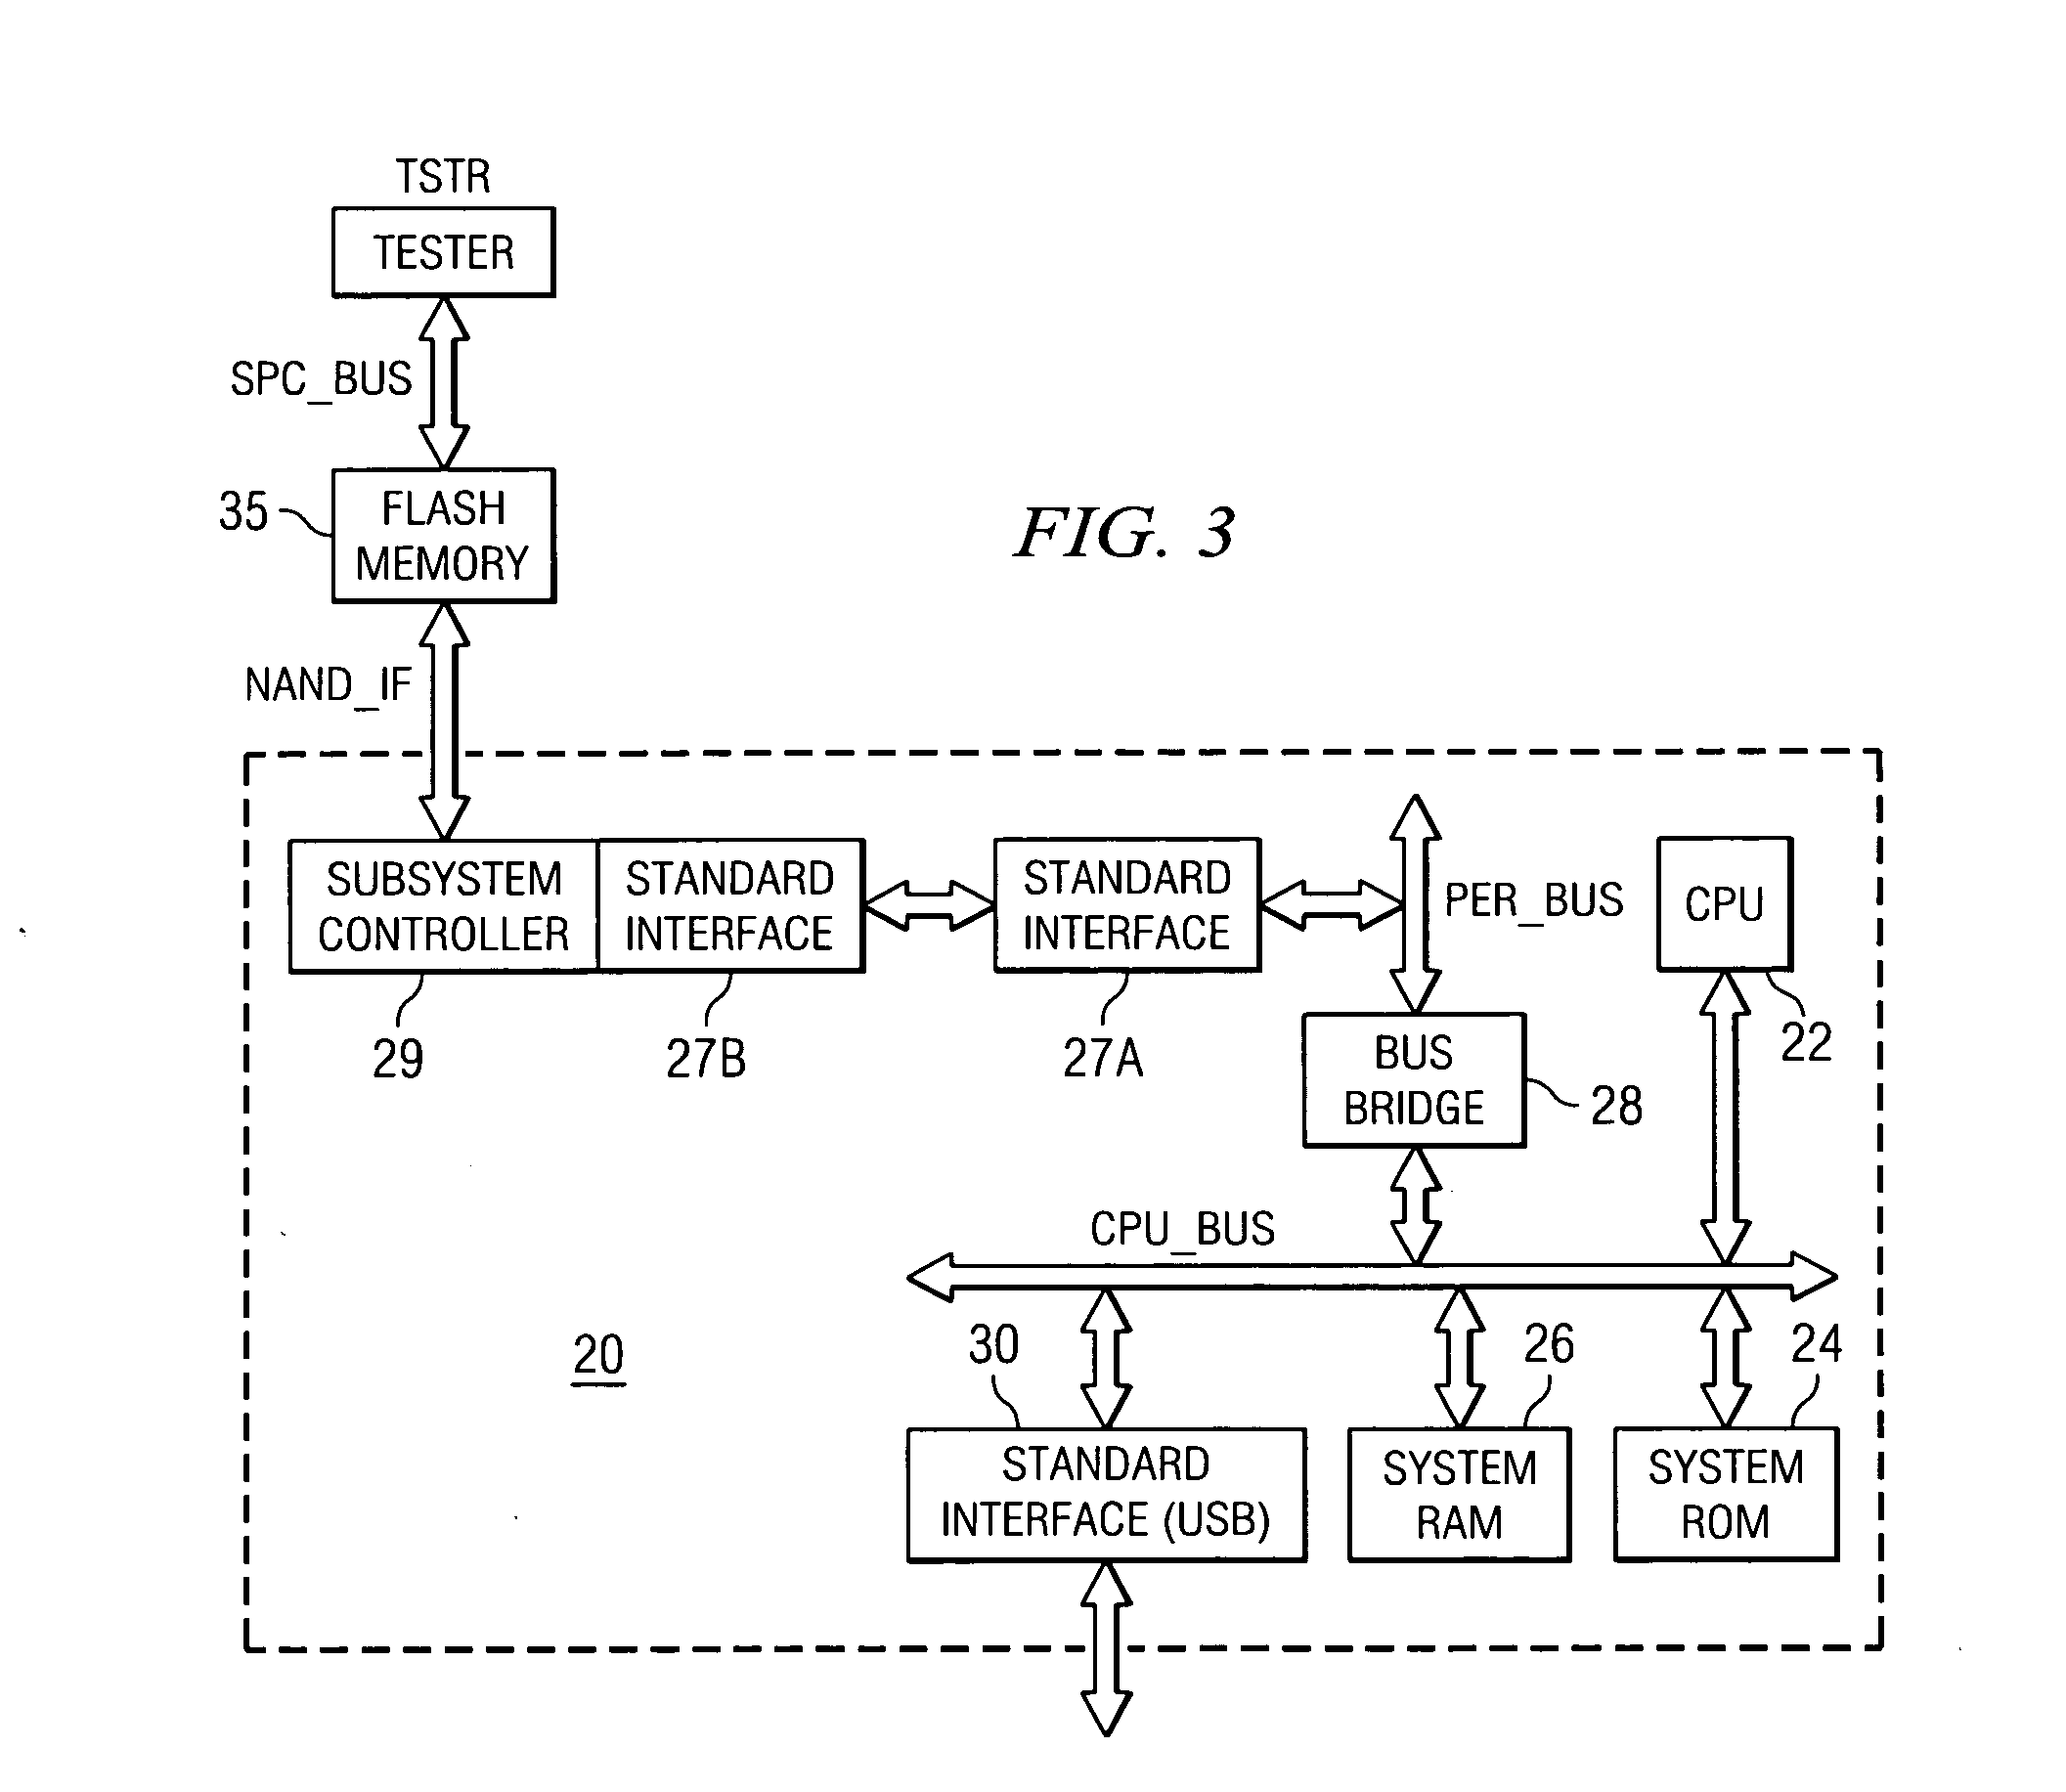 Initialization of flash storage via an embedded controller